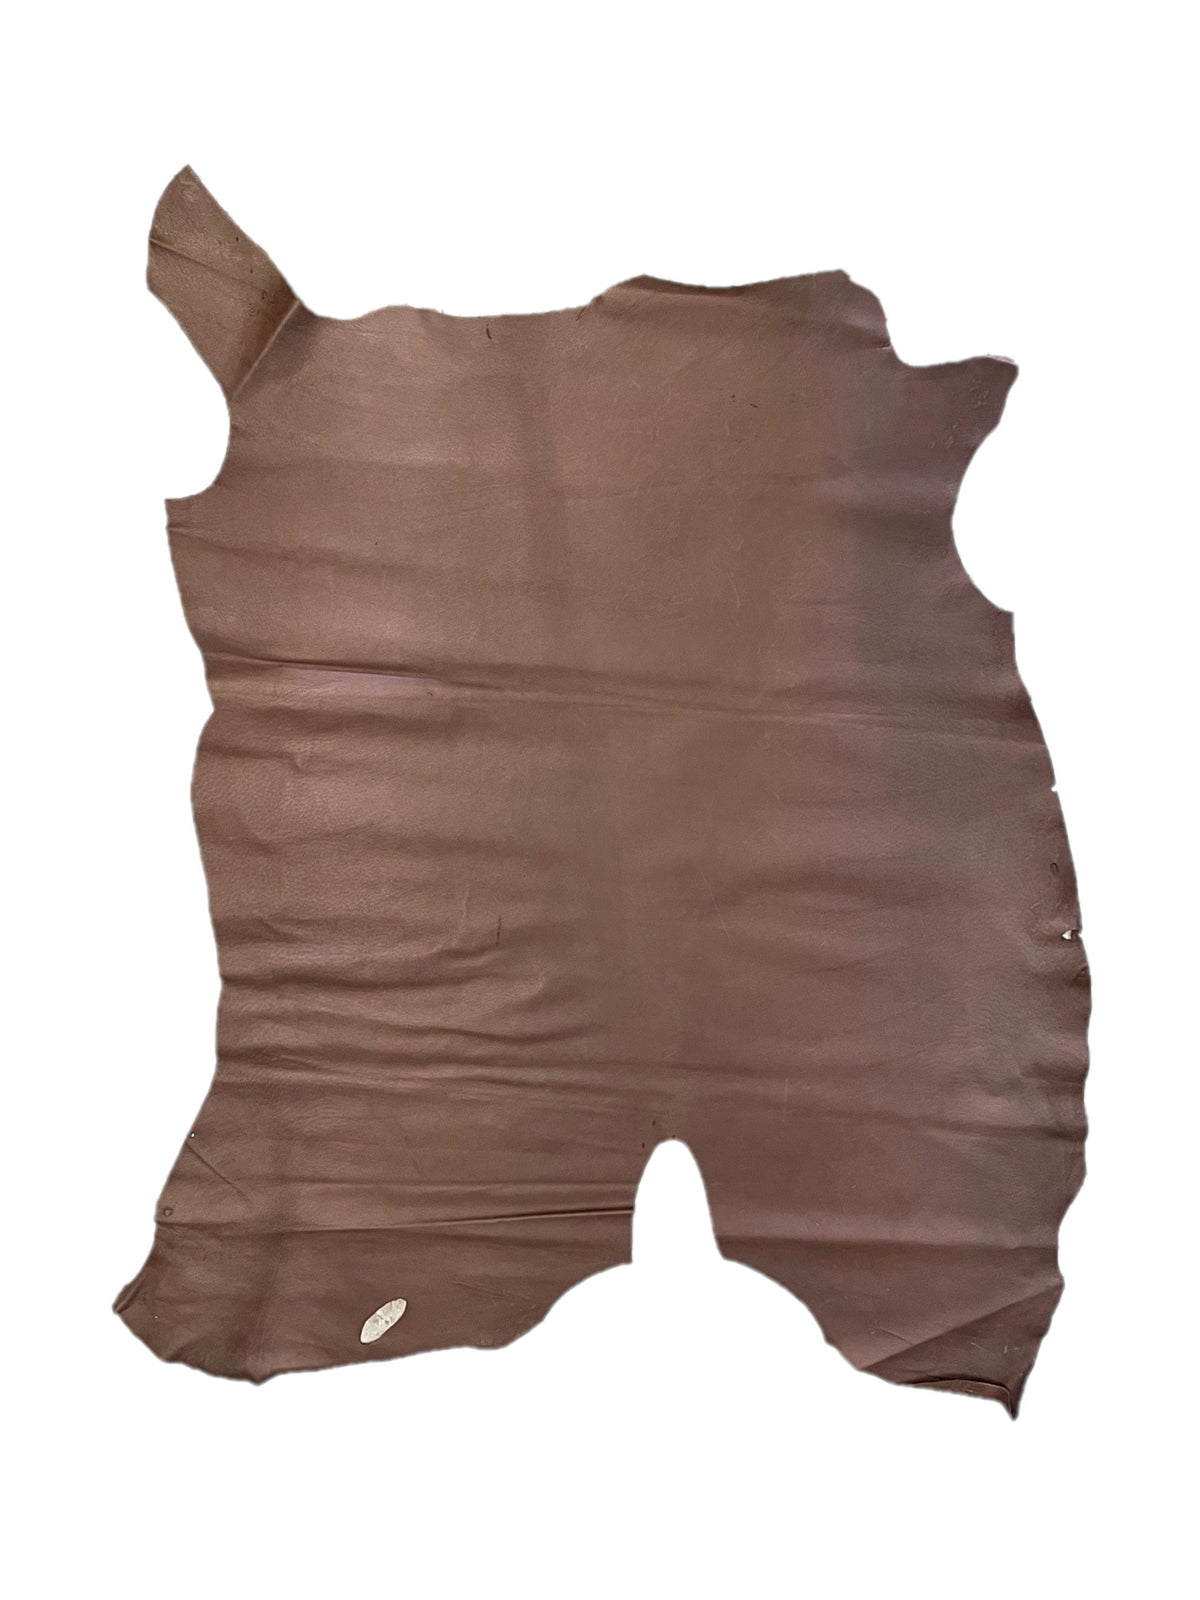 Pig Skin Lining | Brown | 0.6mm | 14 sq.ft | From $55 ea.